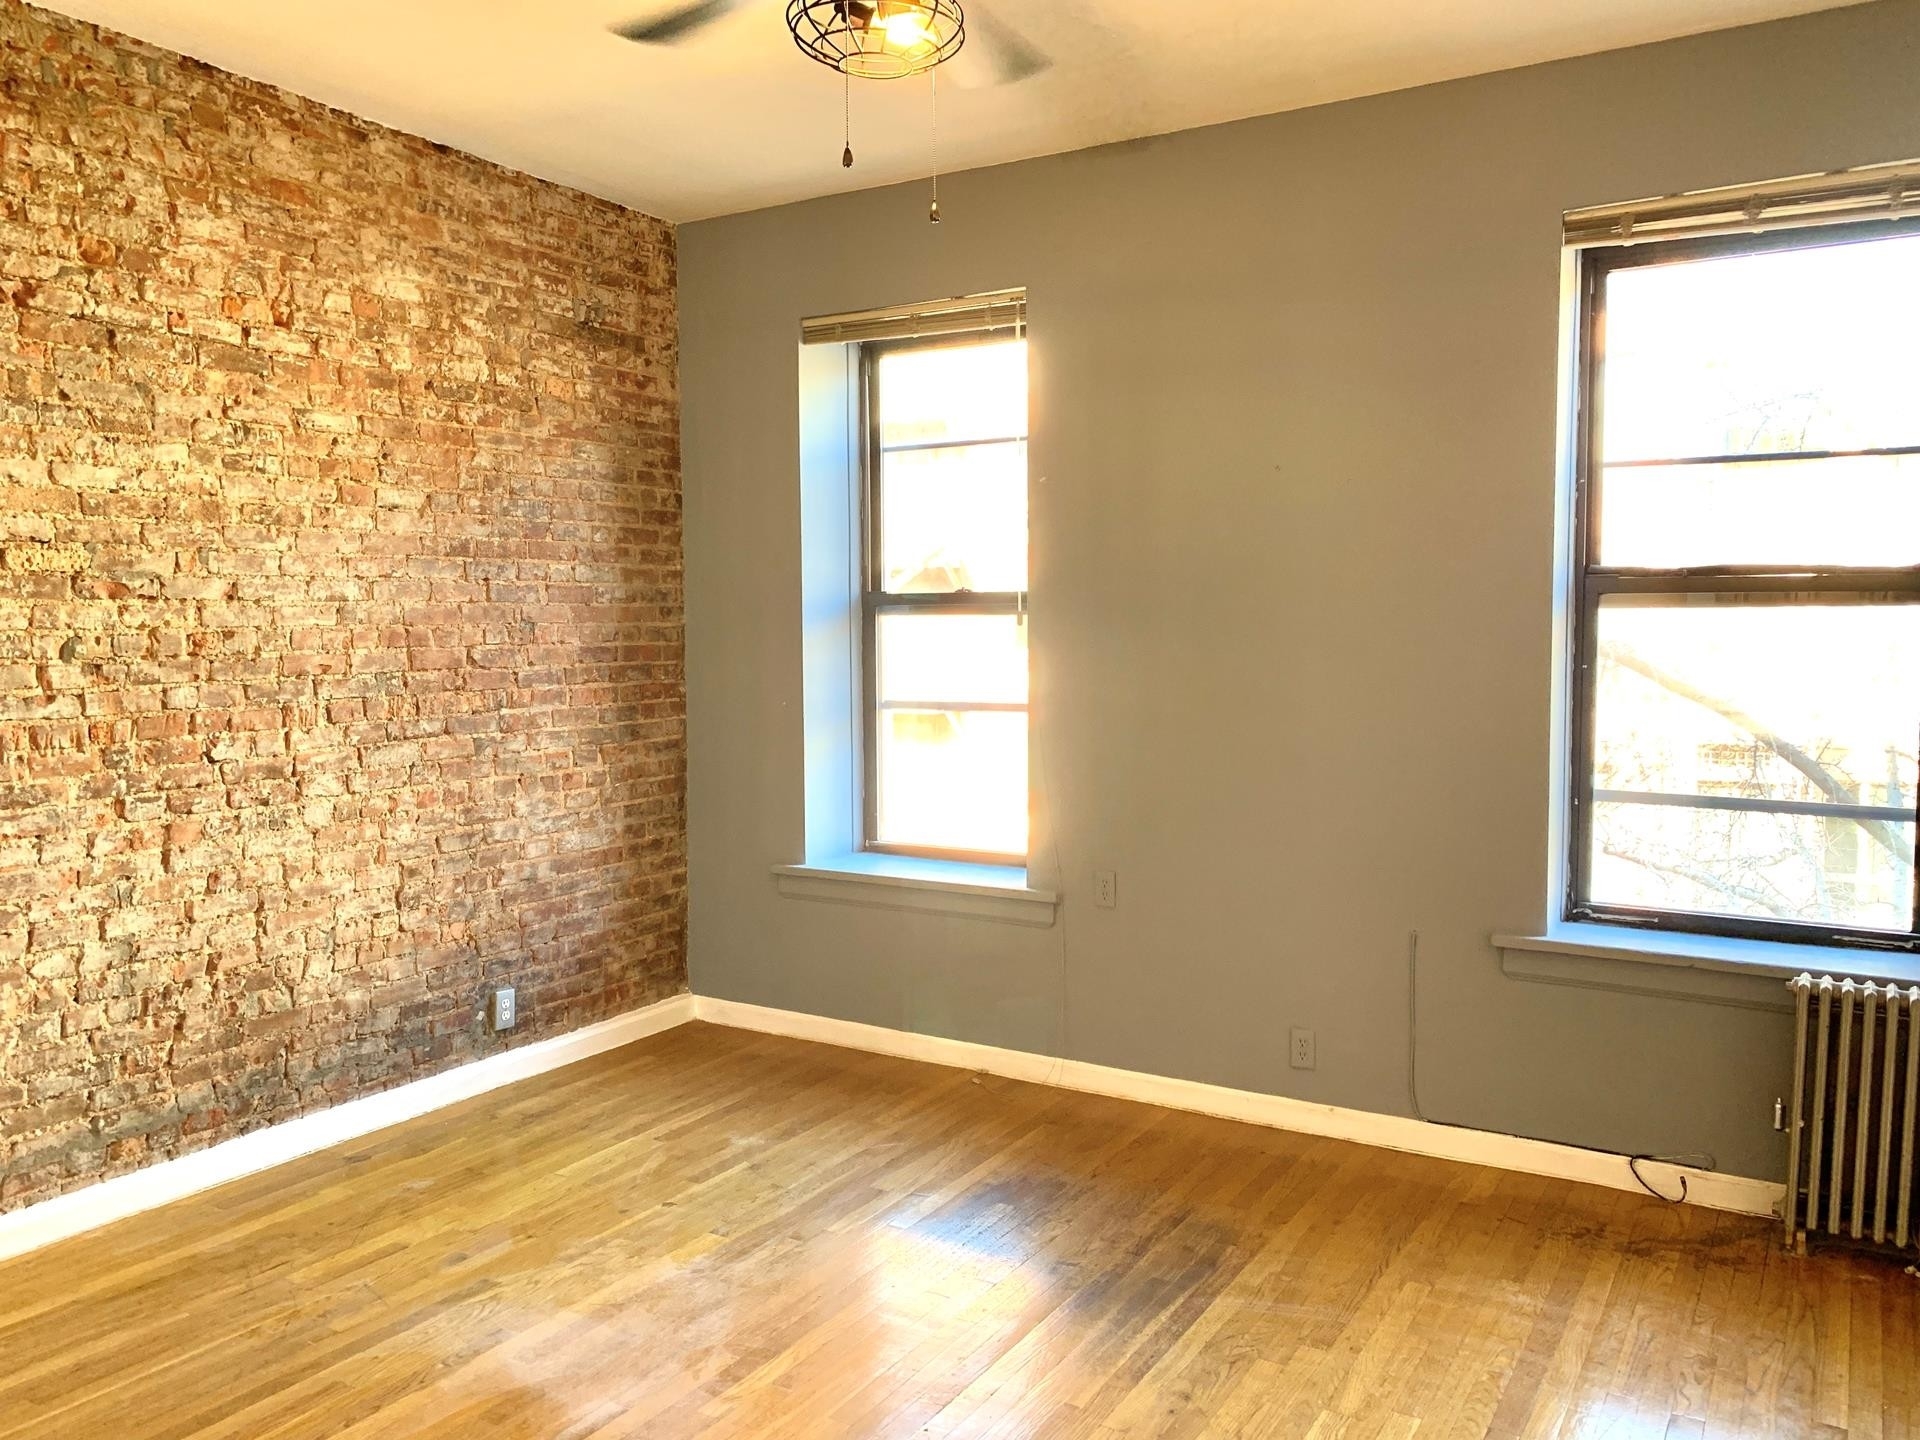 Property at 116 West 131st St, 6 New York